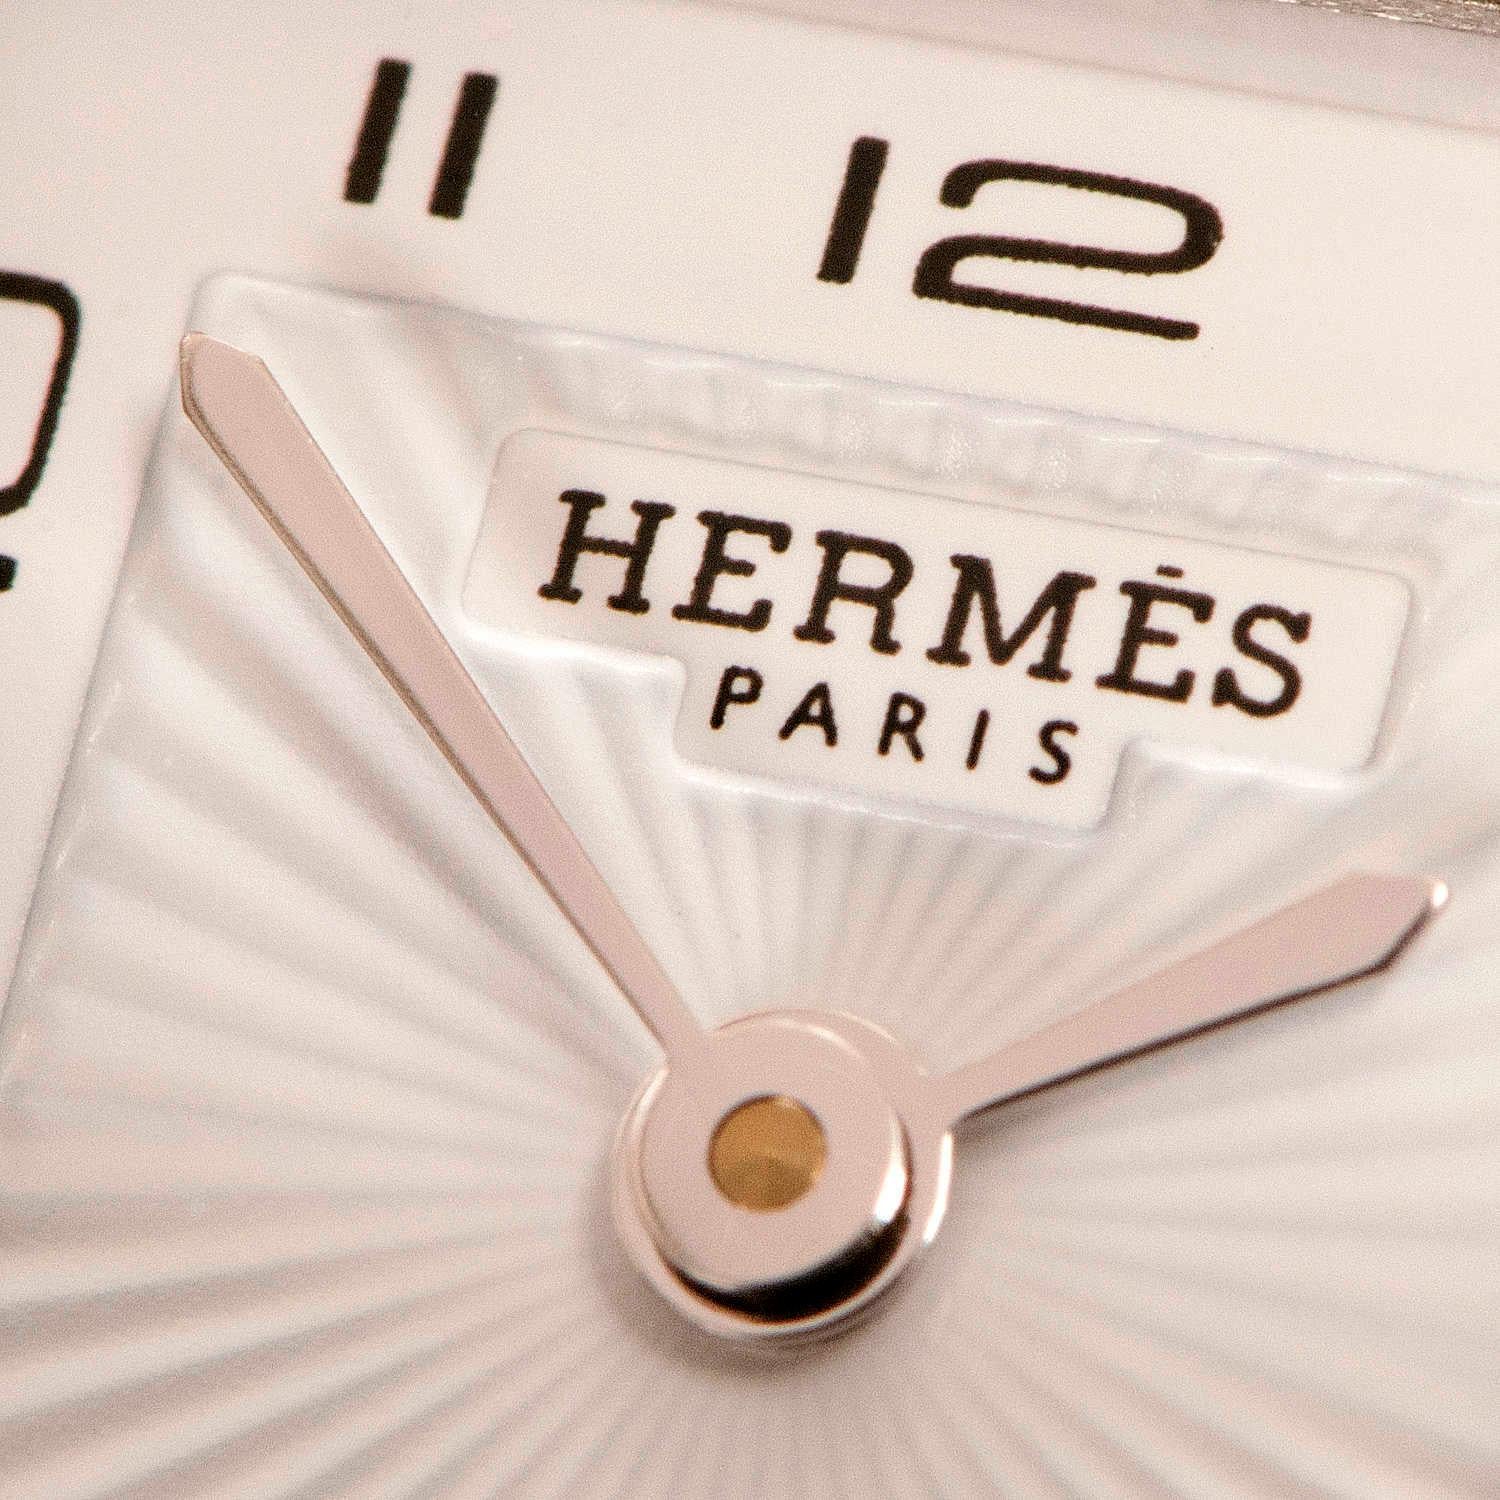 AS NEW - A Boxed Hermes Ladies 'Heure H' double Strap Silver Palladium Watch 4